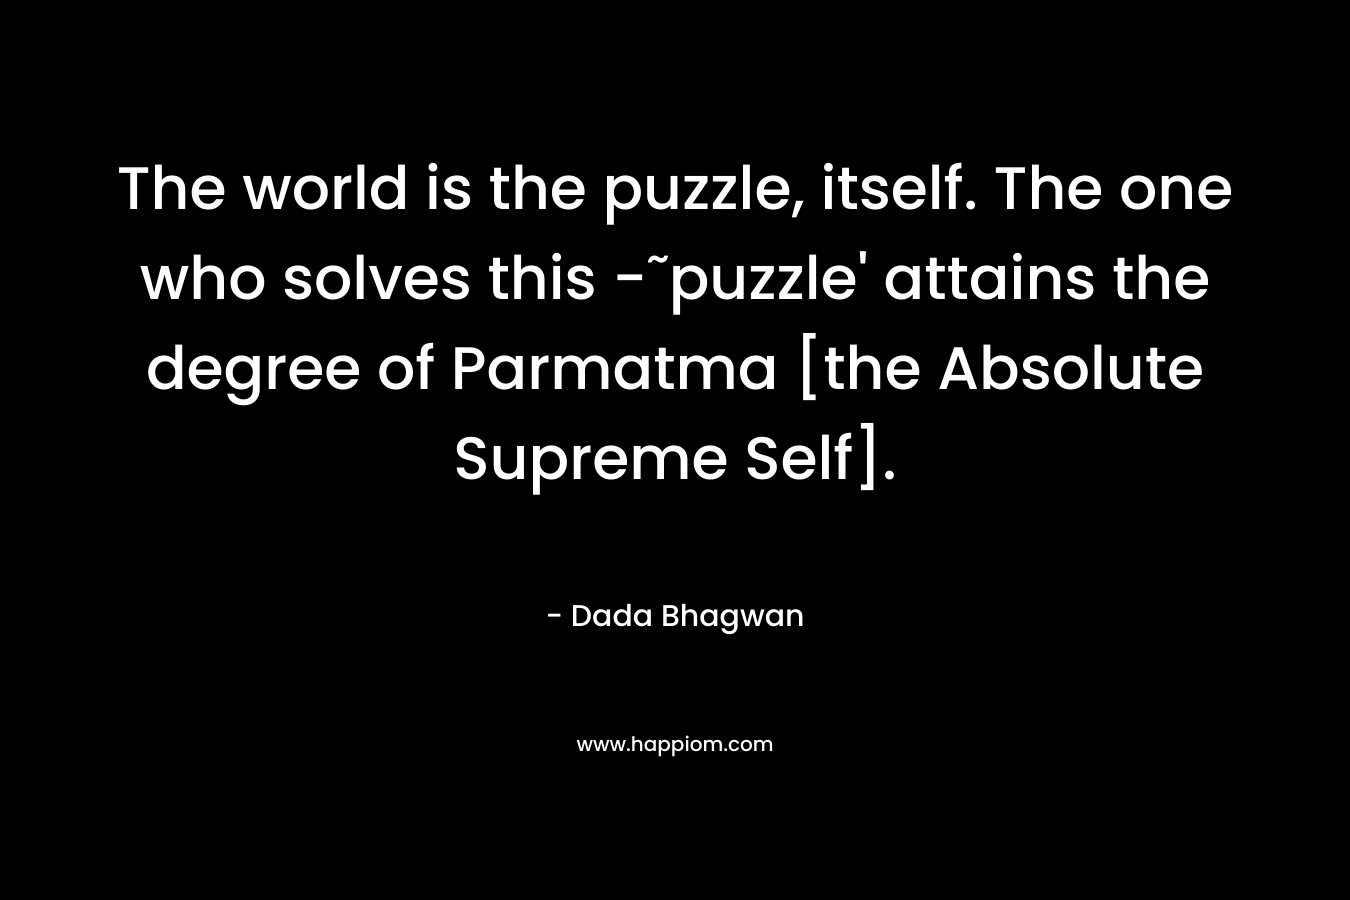 The world is the puzzle, itself. The one who solves this -˜puzzle’ attains the degree of Parmatma [the Absolute Supreme Self]. – Dada Bhagwan